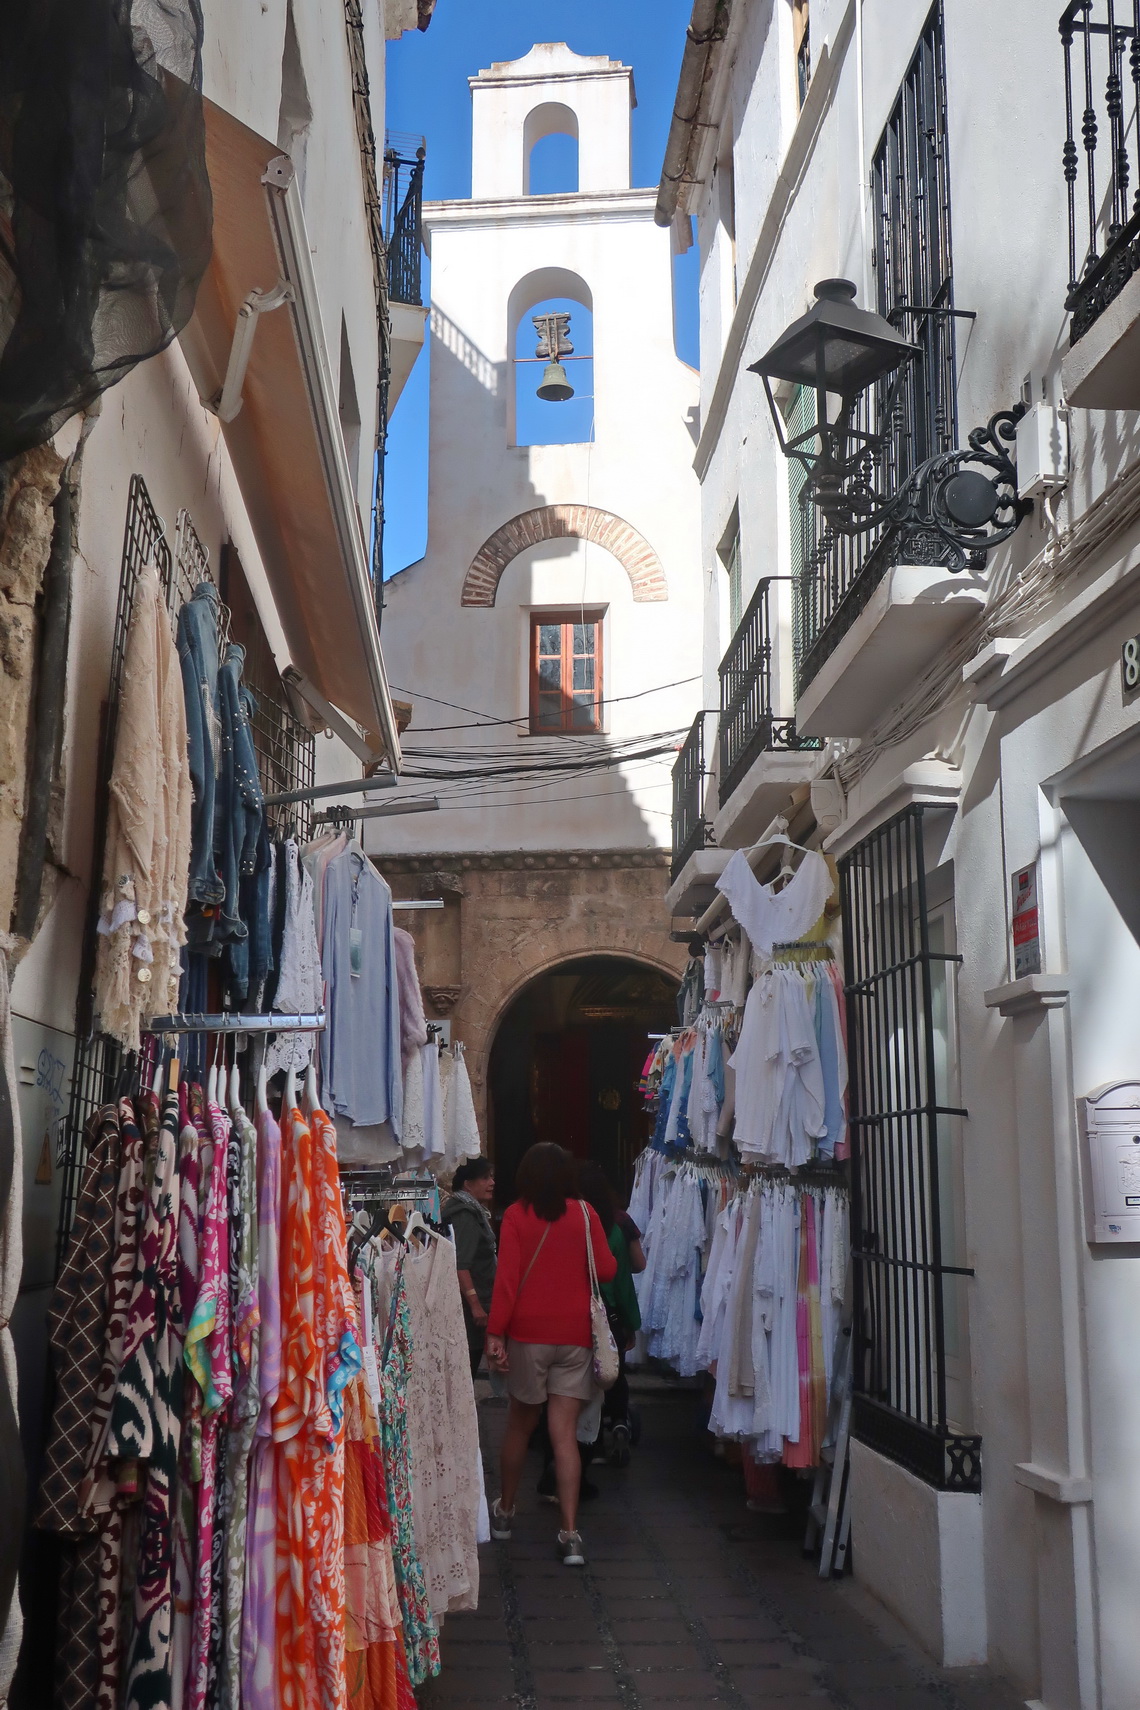 In the old town of Marbella